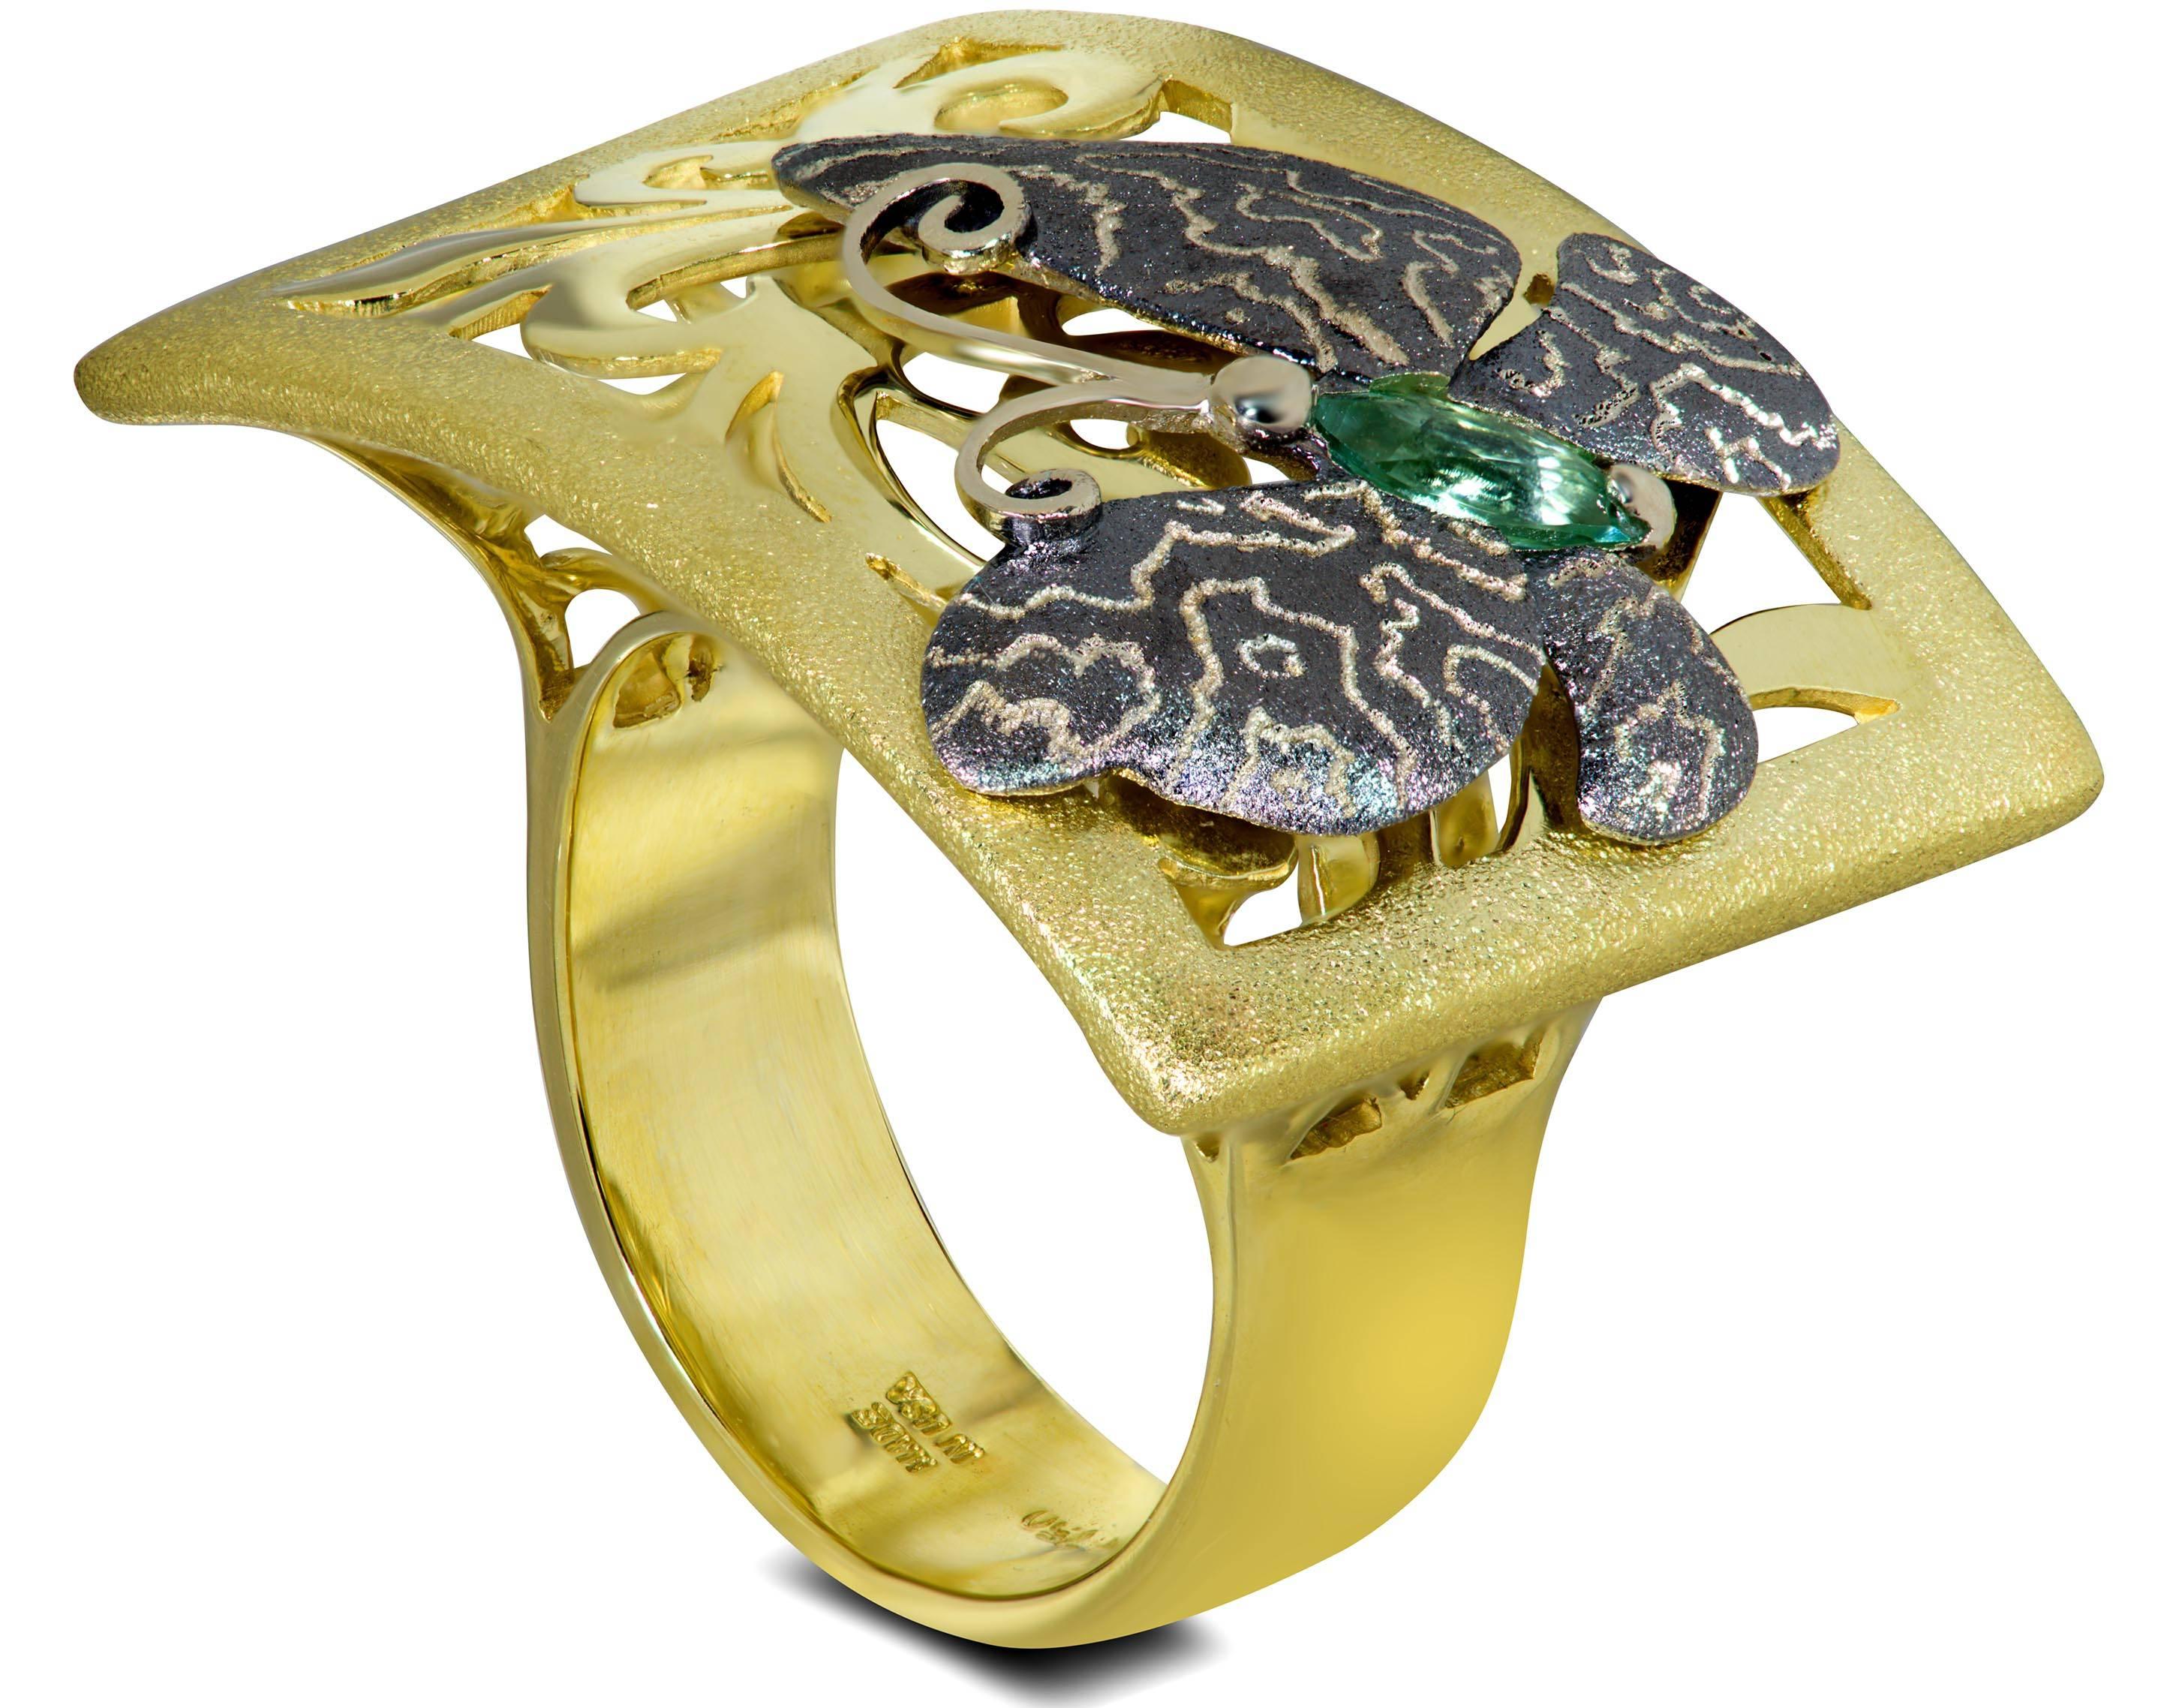 Alex Soldier's Butterfly collection is dedicated to celebration of life. Butterflies remind us to enjoy the moment and embrace change. Made in 18 karat yellow gold with green tourmaline (0.25 ct), this lovely butterfly ring is finished with Alex